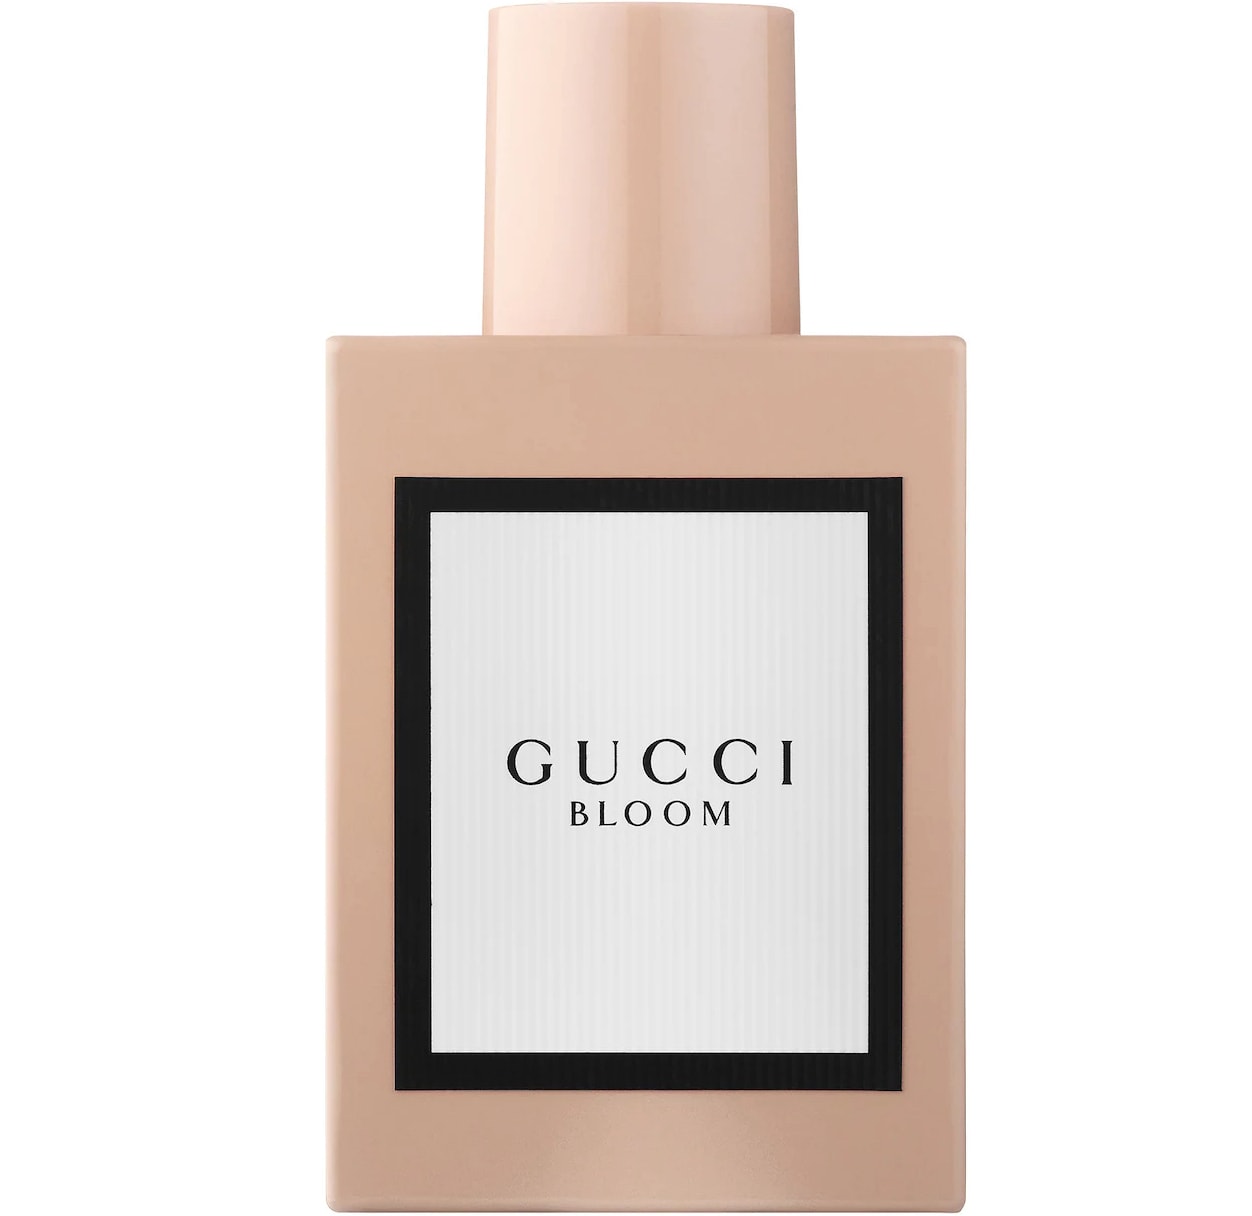 Pink bottle of Gucci Bloom perfume